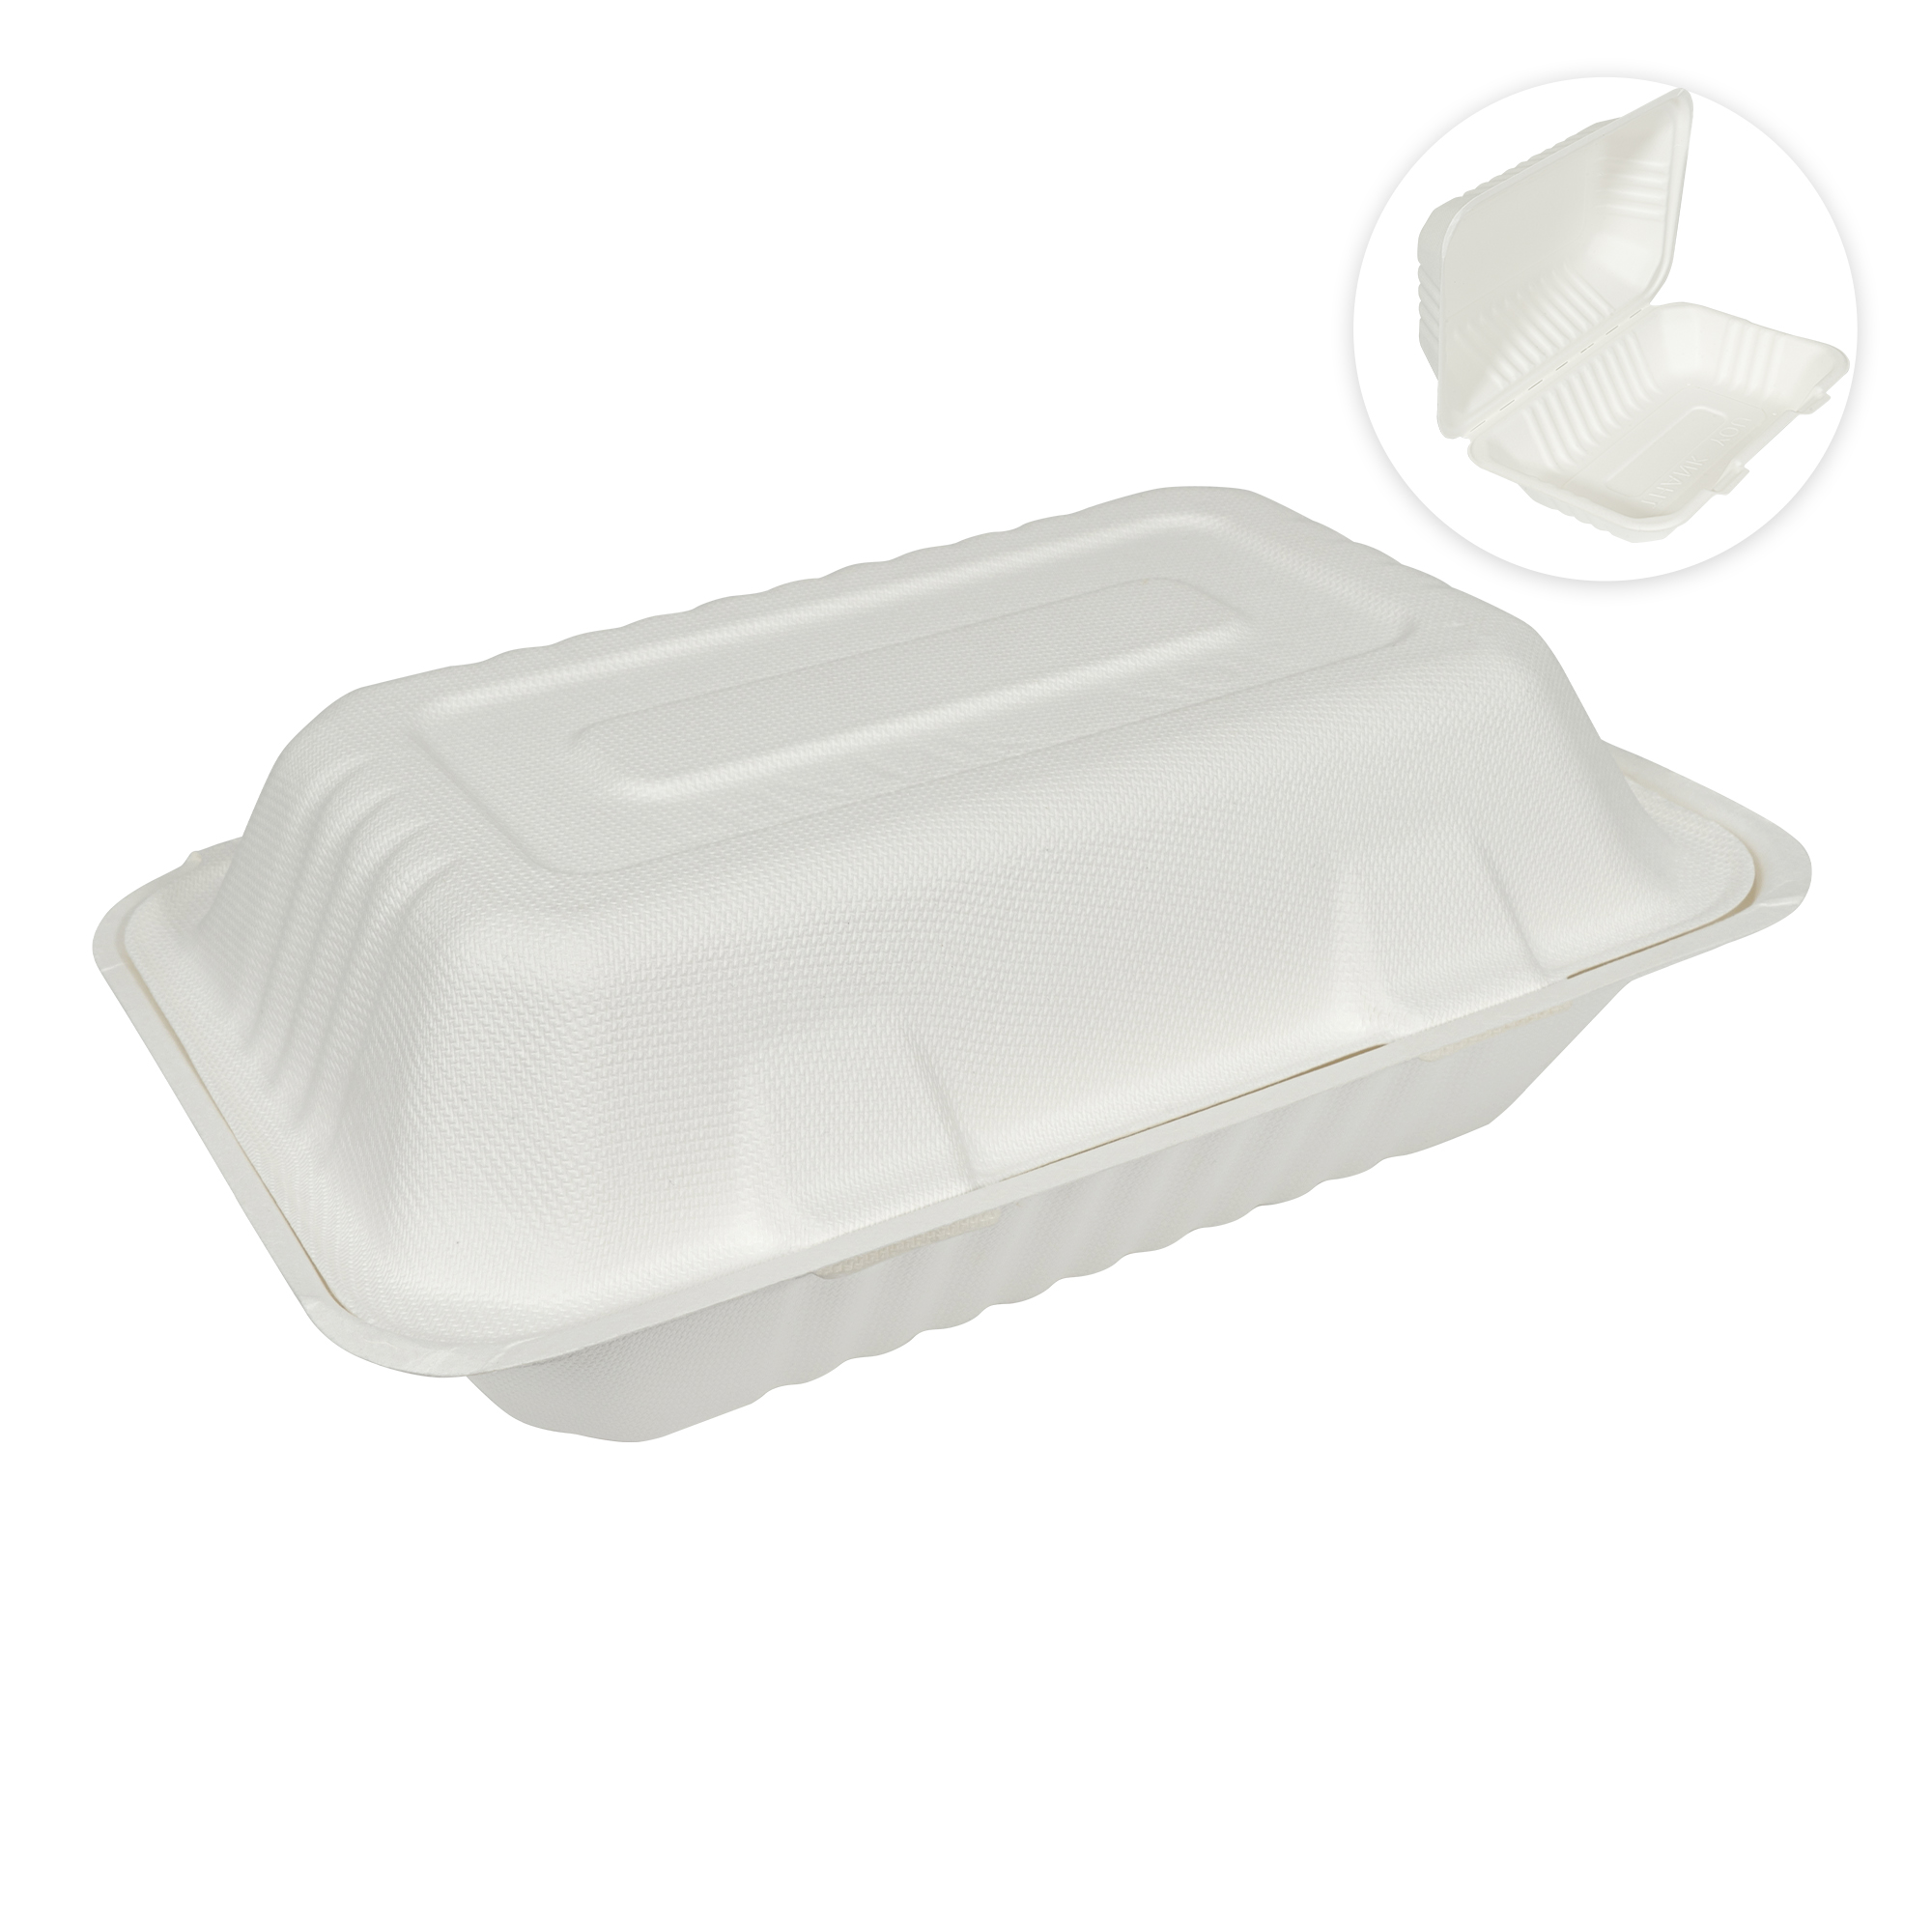 Rectangular Compostable Fiber Hinged Container 9" x 6" 50pc/pack - White